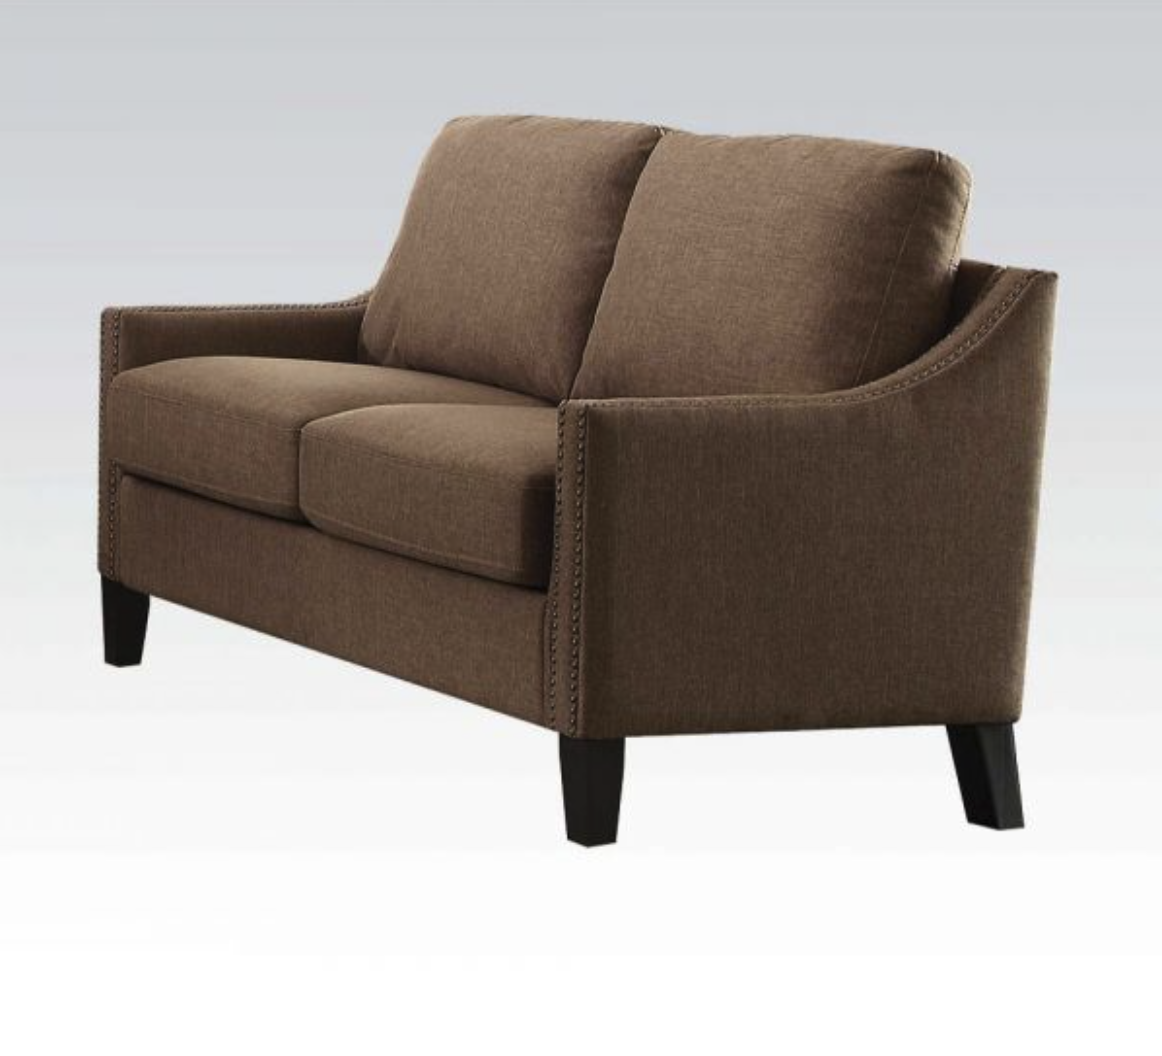 Zapata Transitional Upholstered Sofa in Brown - Acme Furniture